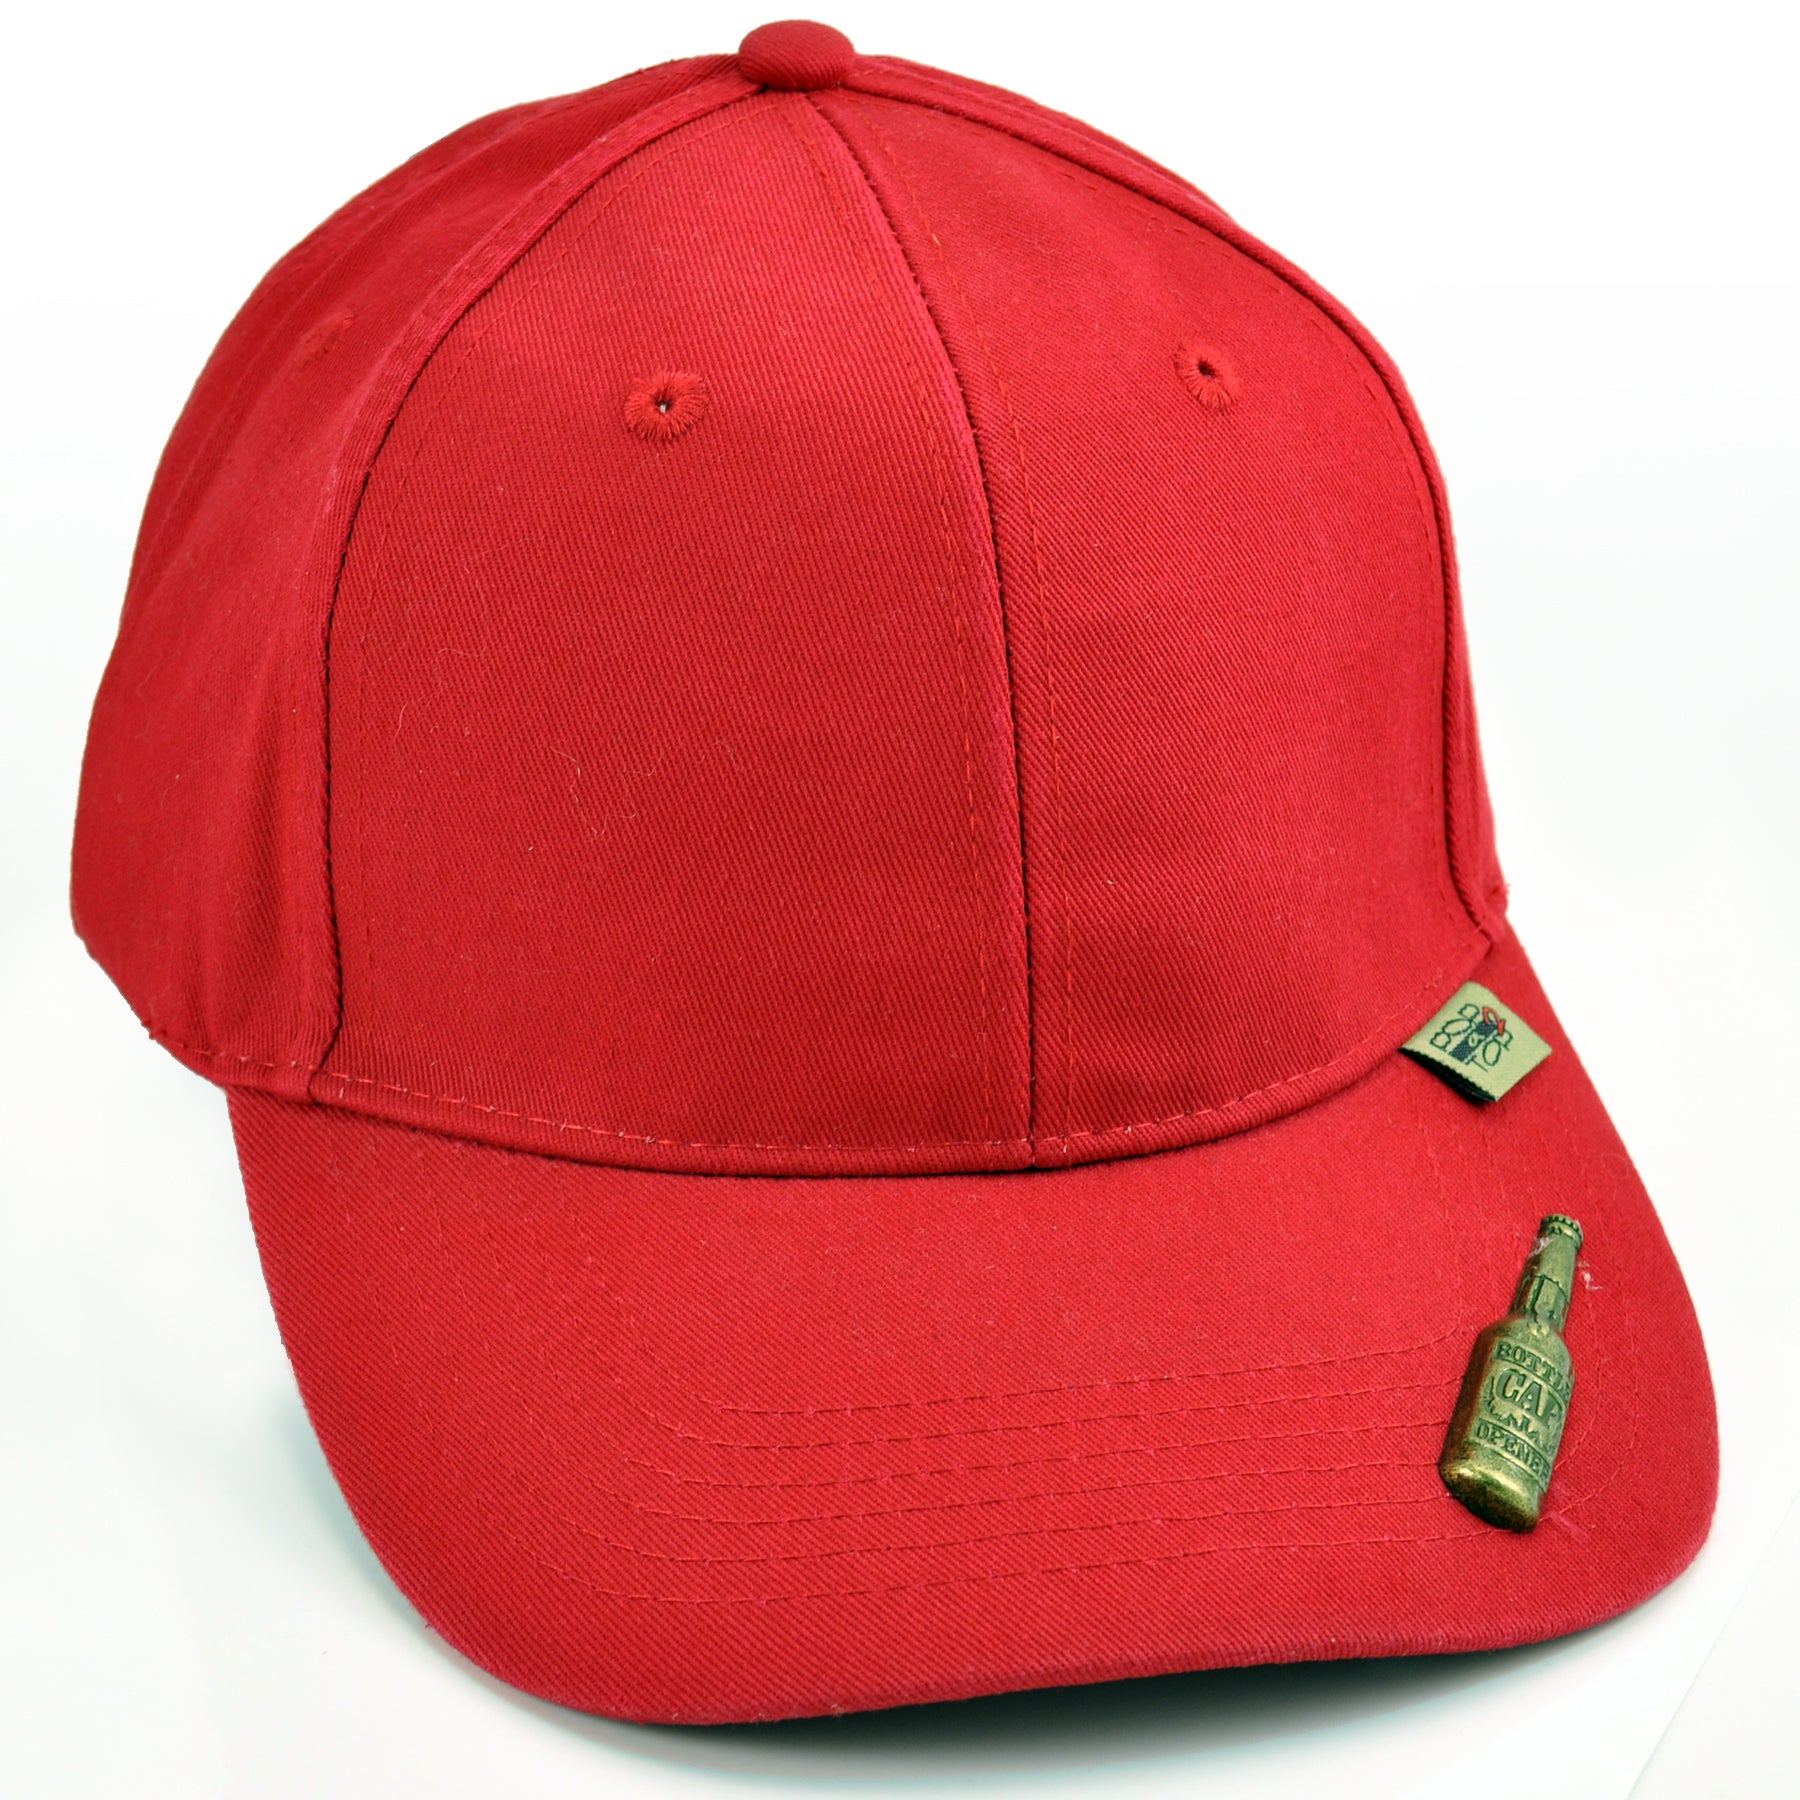 POP-A-TOP Snapback Hat with Bottle Opener in Red